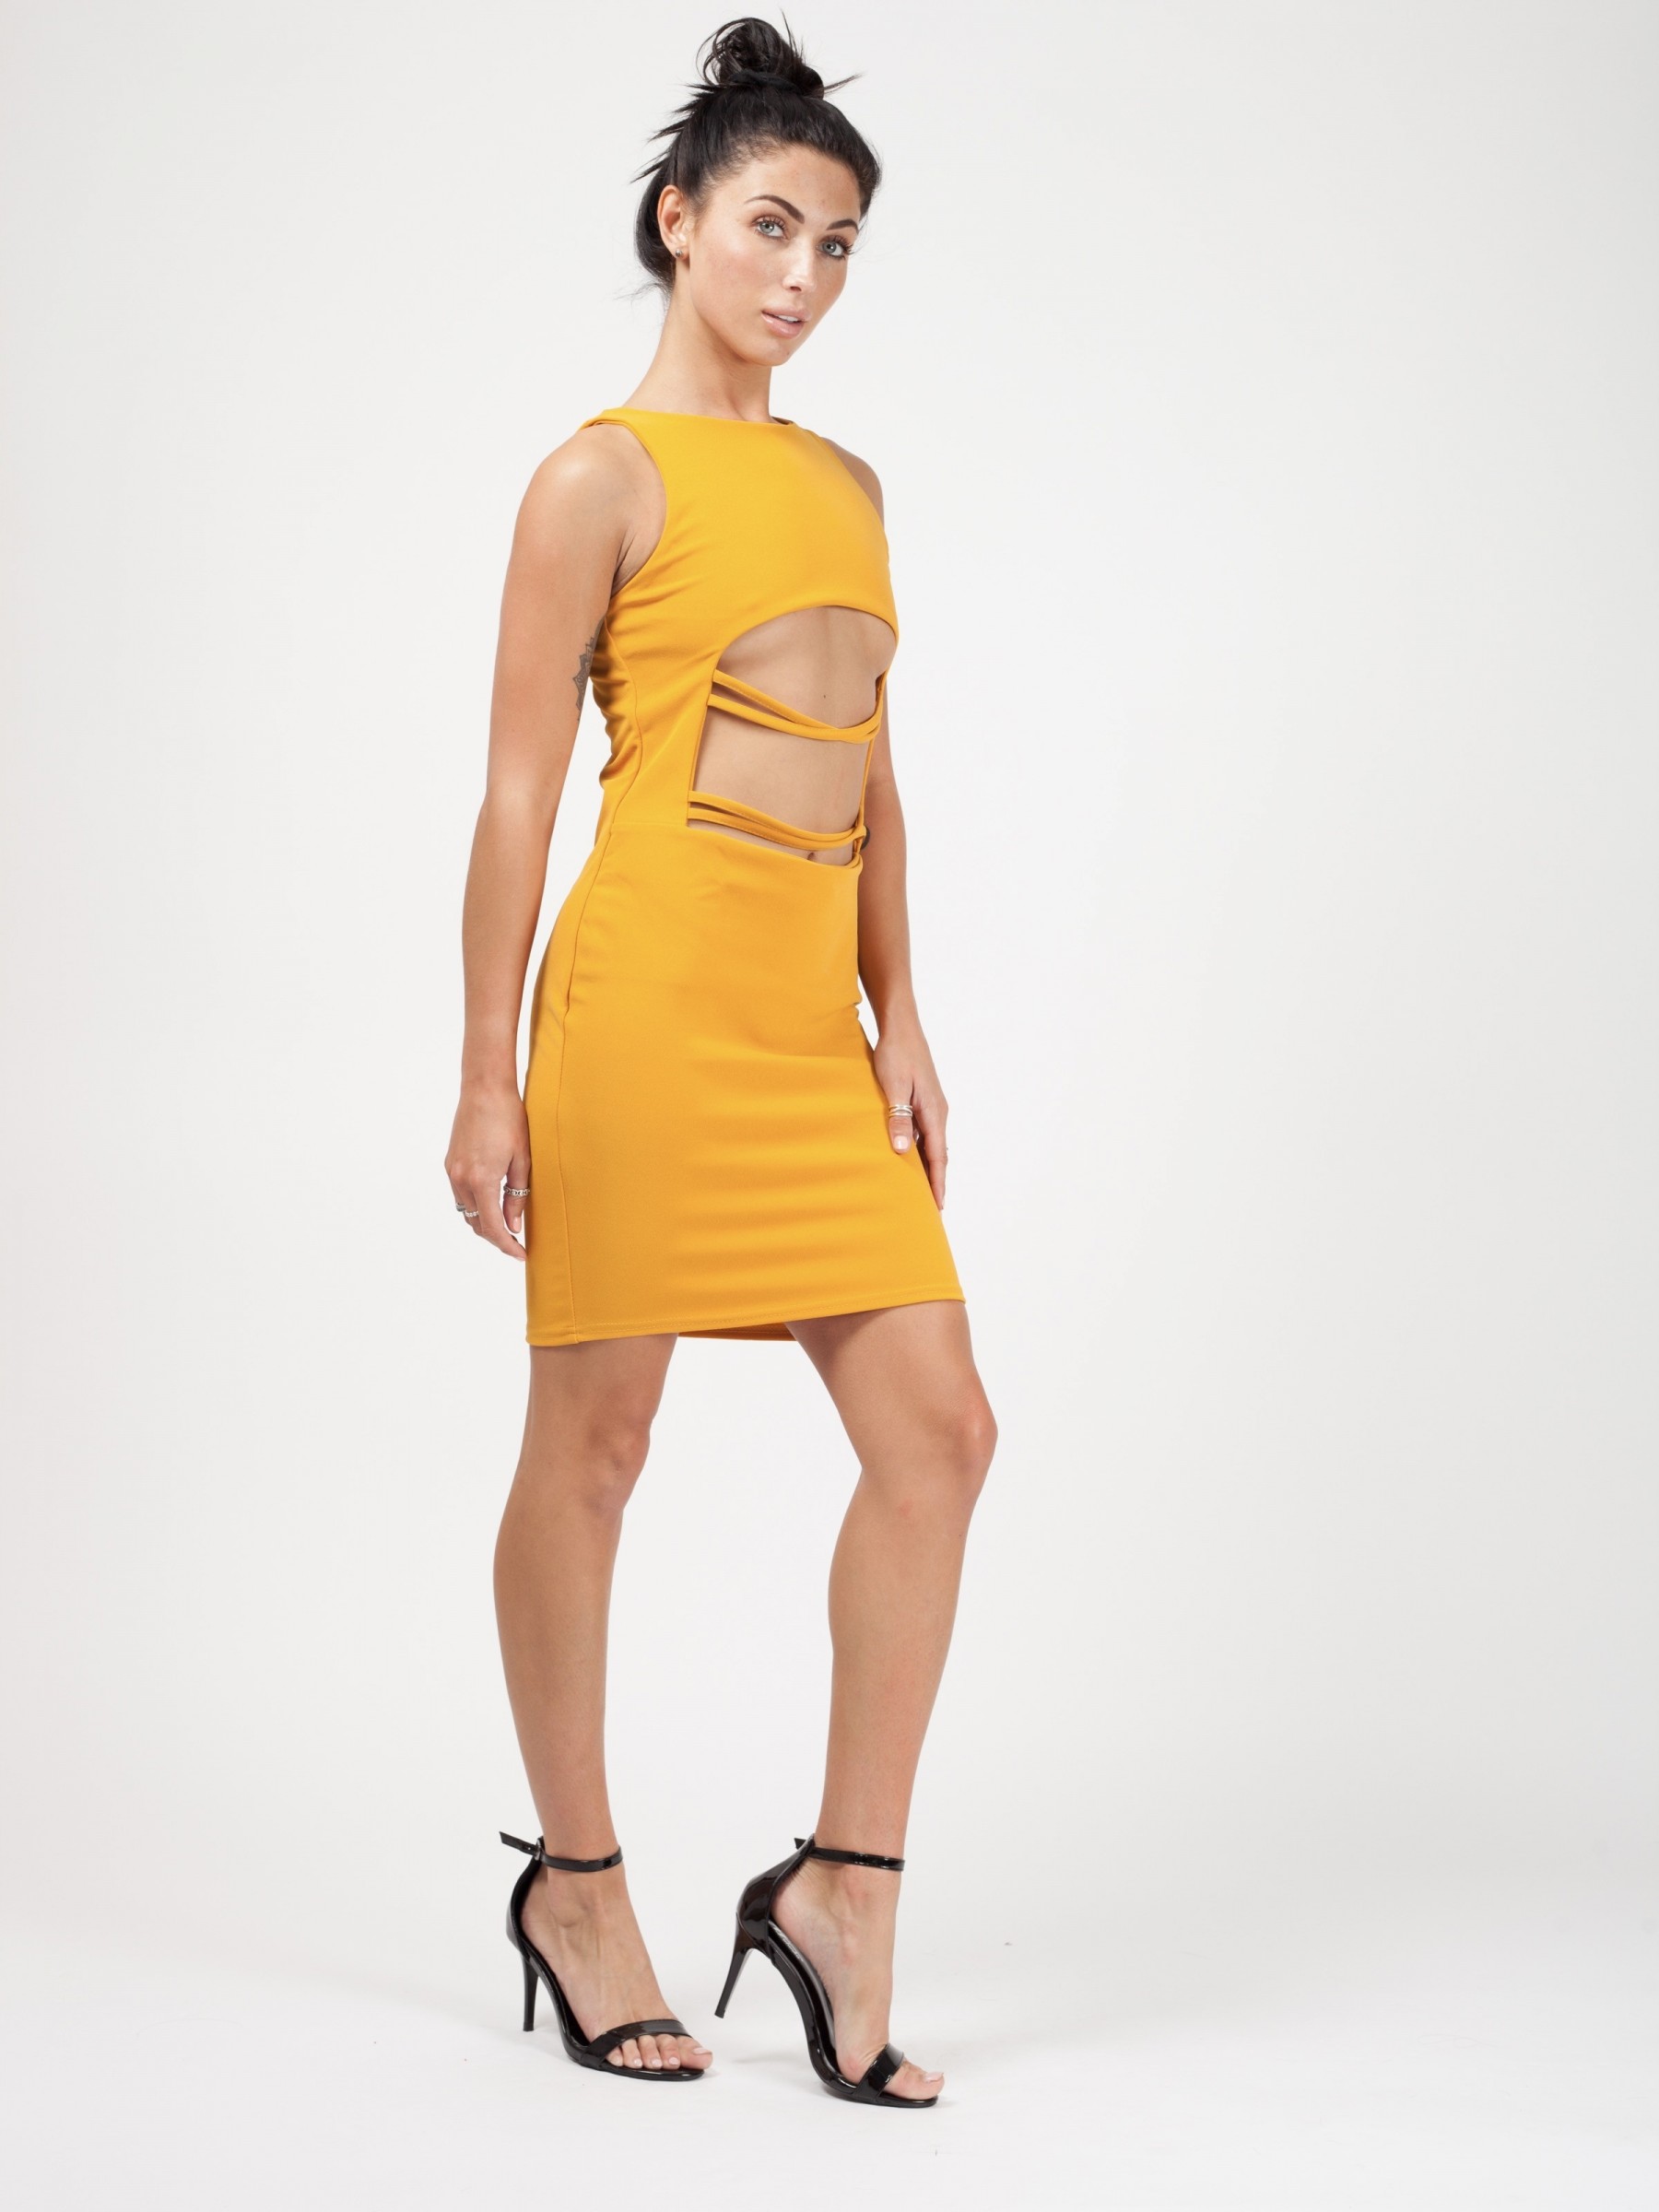 stock_images/Cut_Out_String_Front_Bodycon_Dress-Mustard_1.jpg